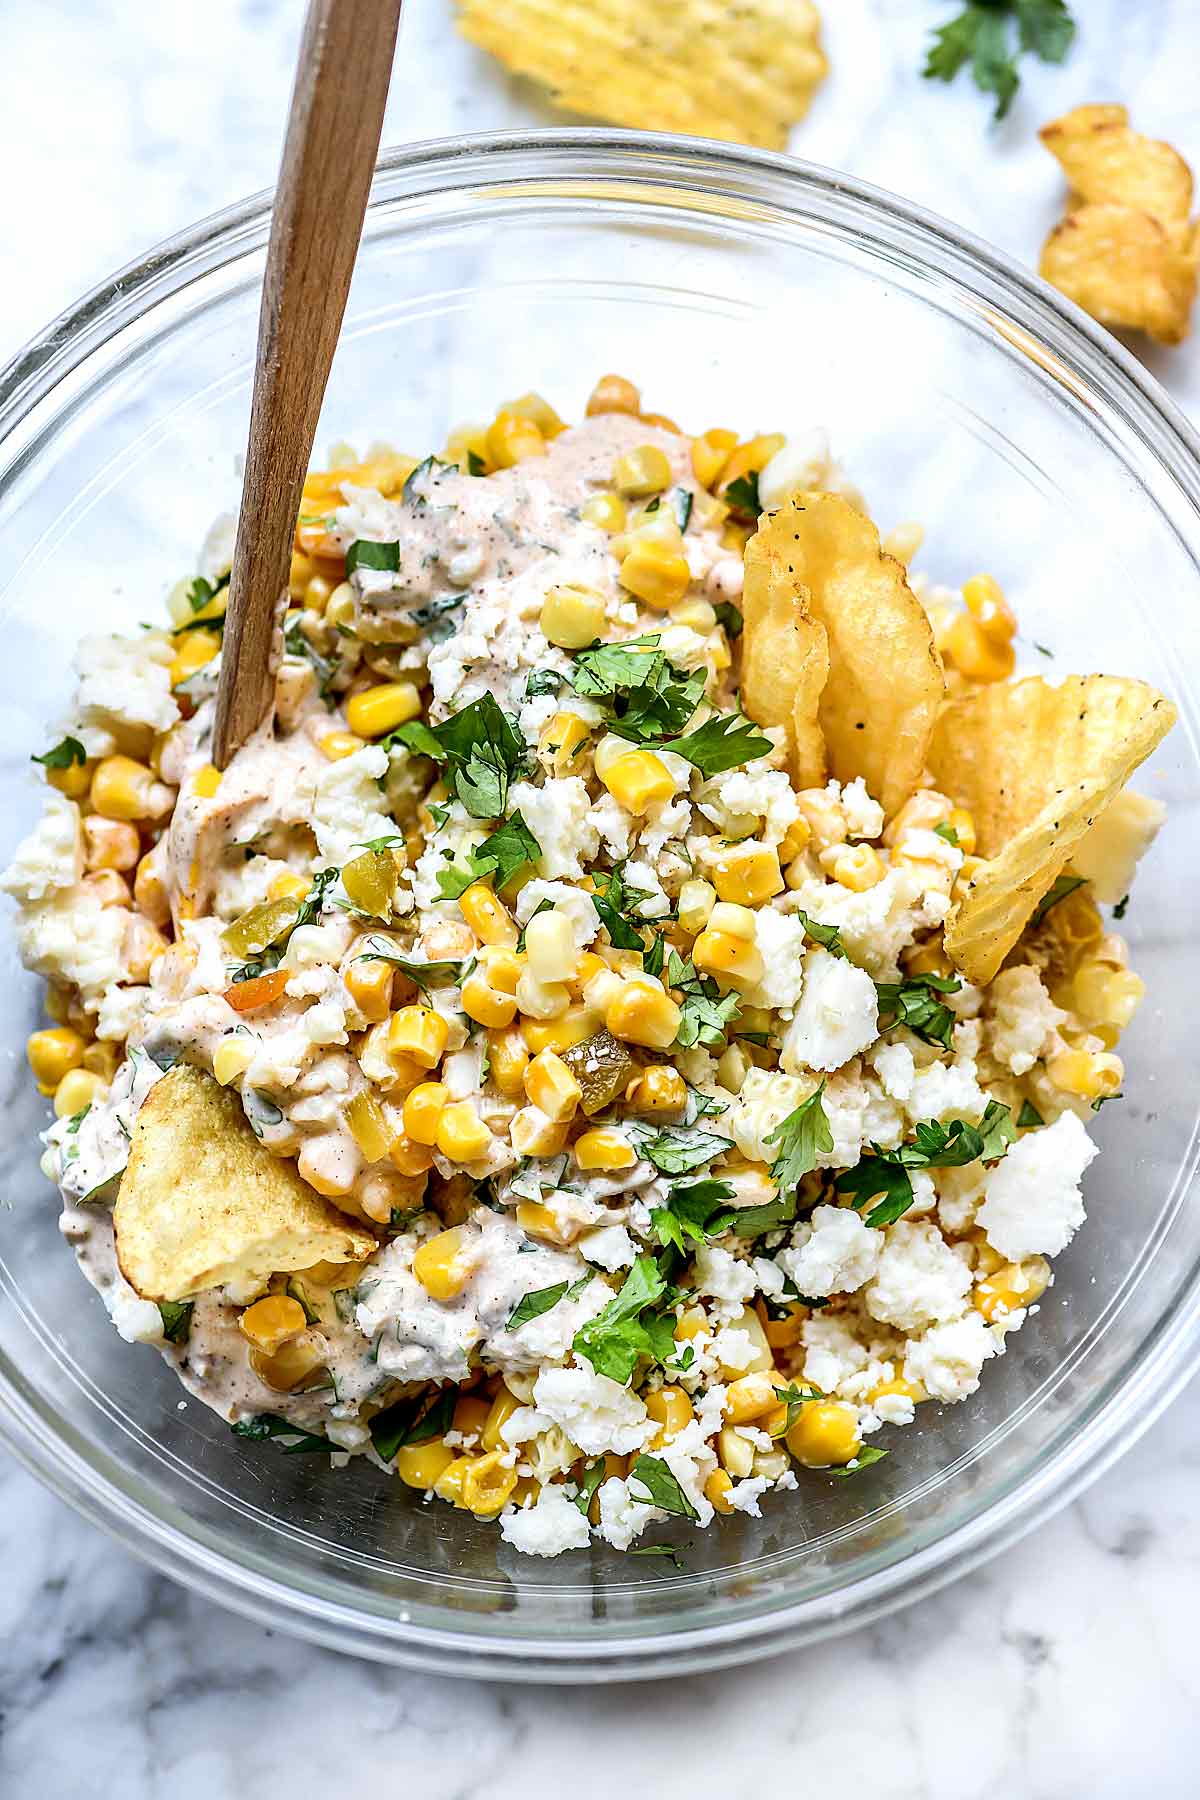 Mexican Corn Dip (Hot or Cold!) - foodiecrush .com